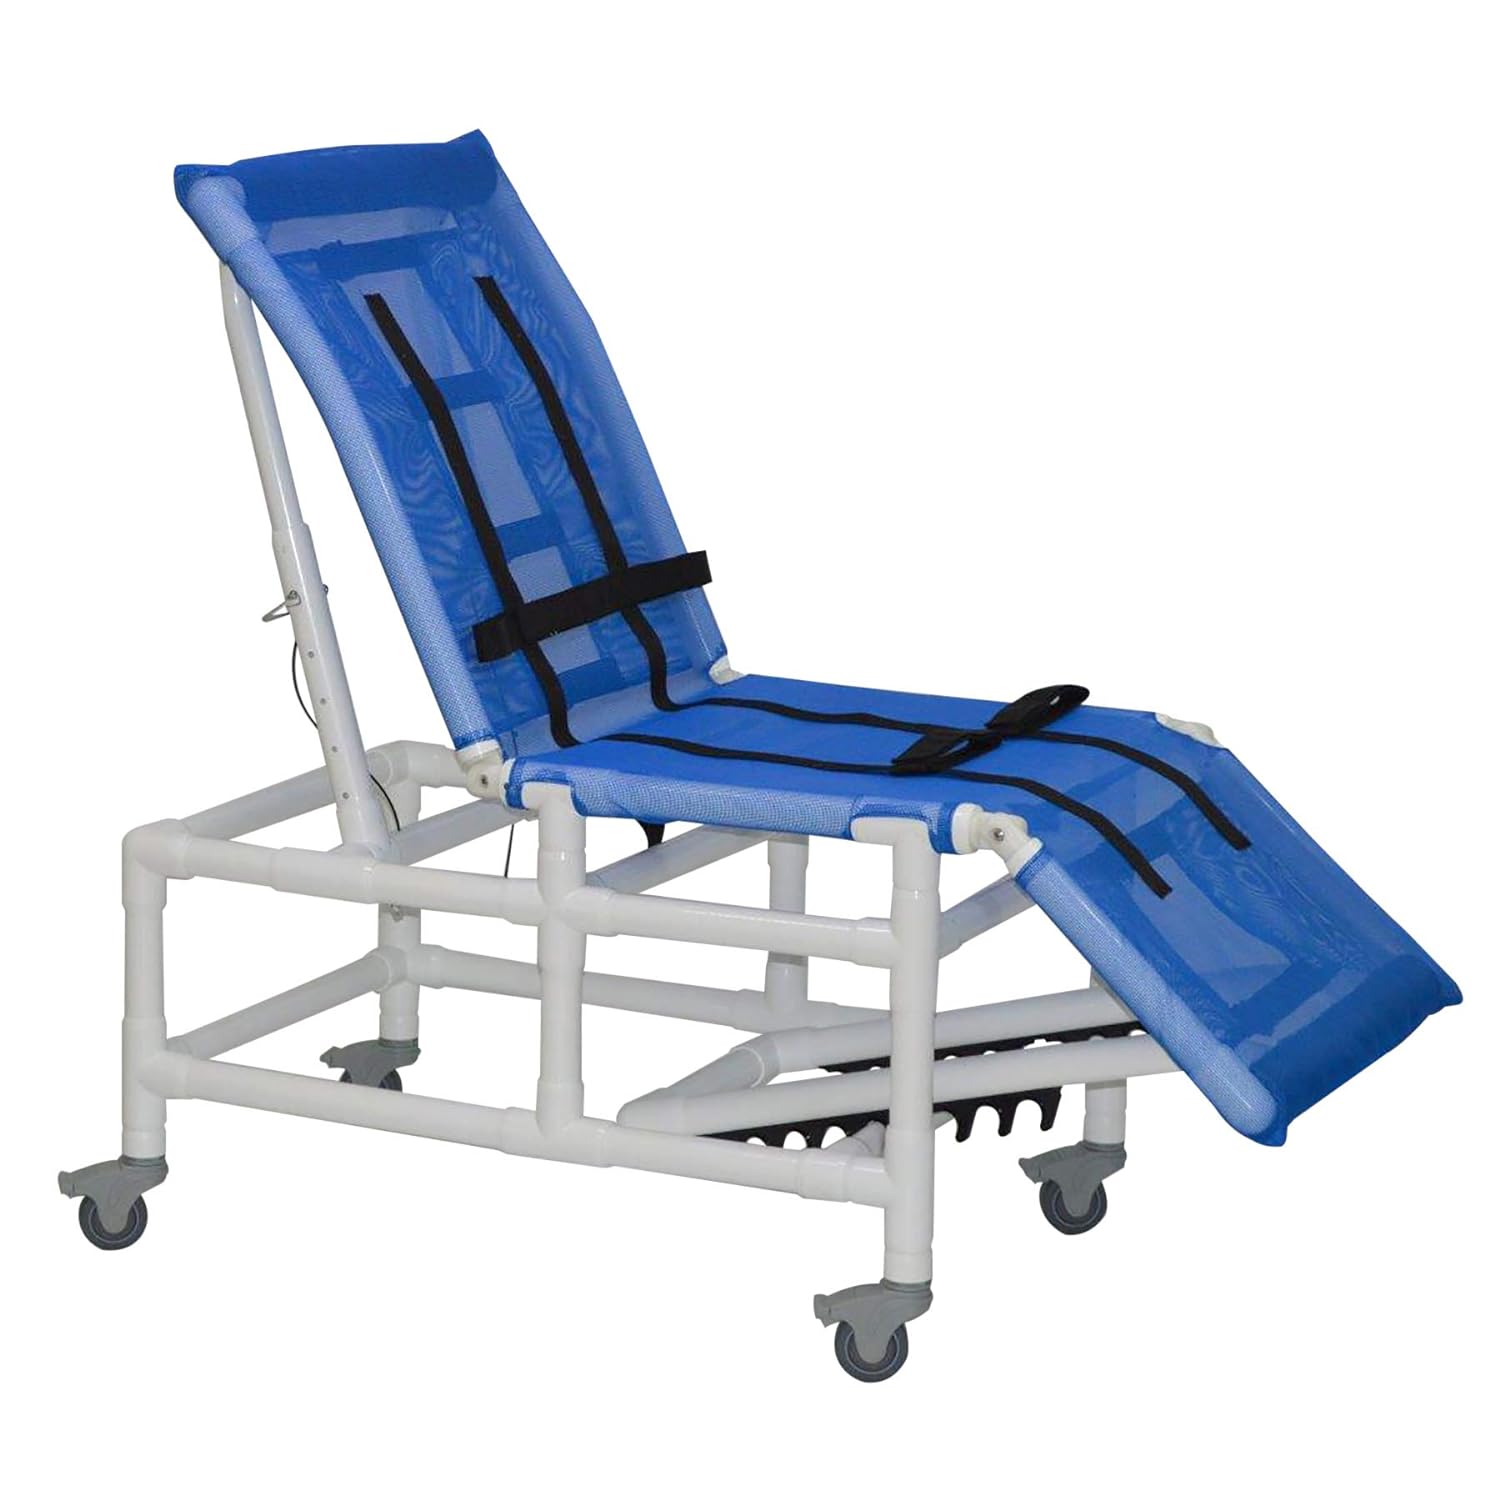 MJM International Corp. X-Large 20Inch internal width multi-positioning bathing chair 3Inch Total Lock casters 24Inch height from floor to top of seat 2